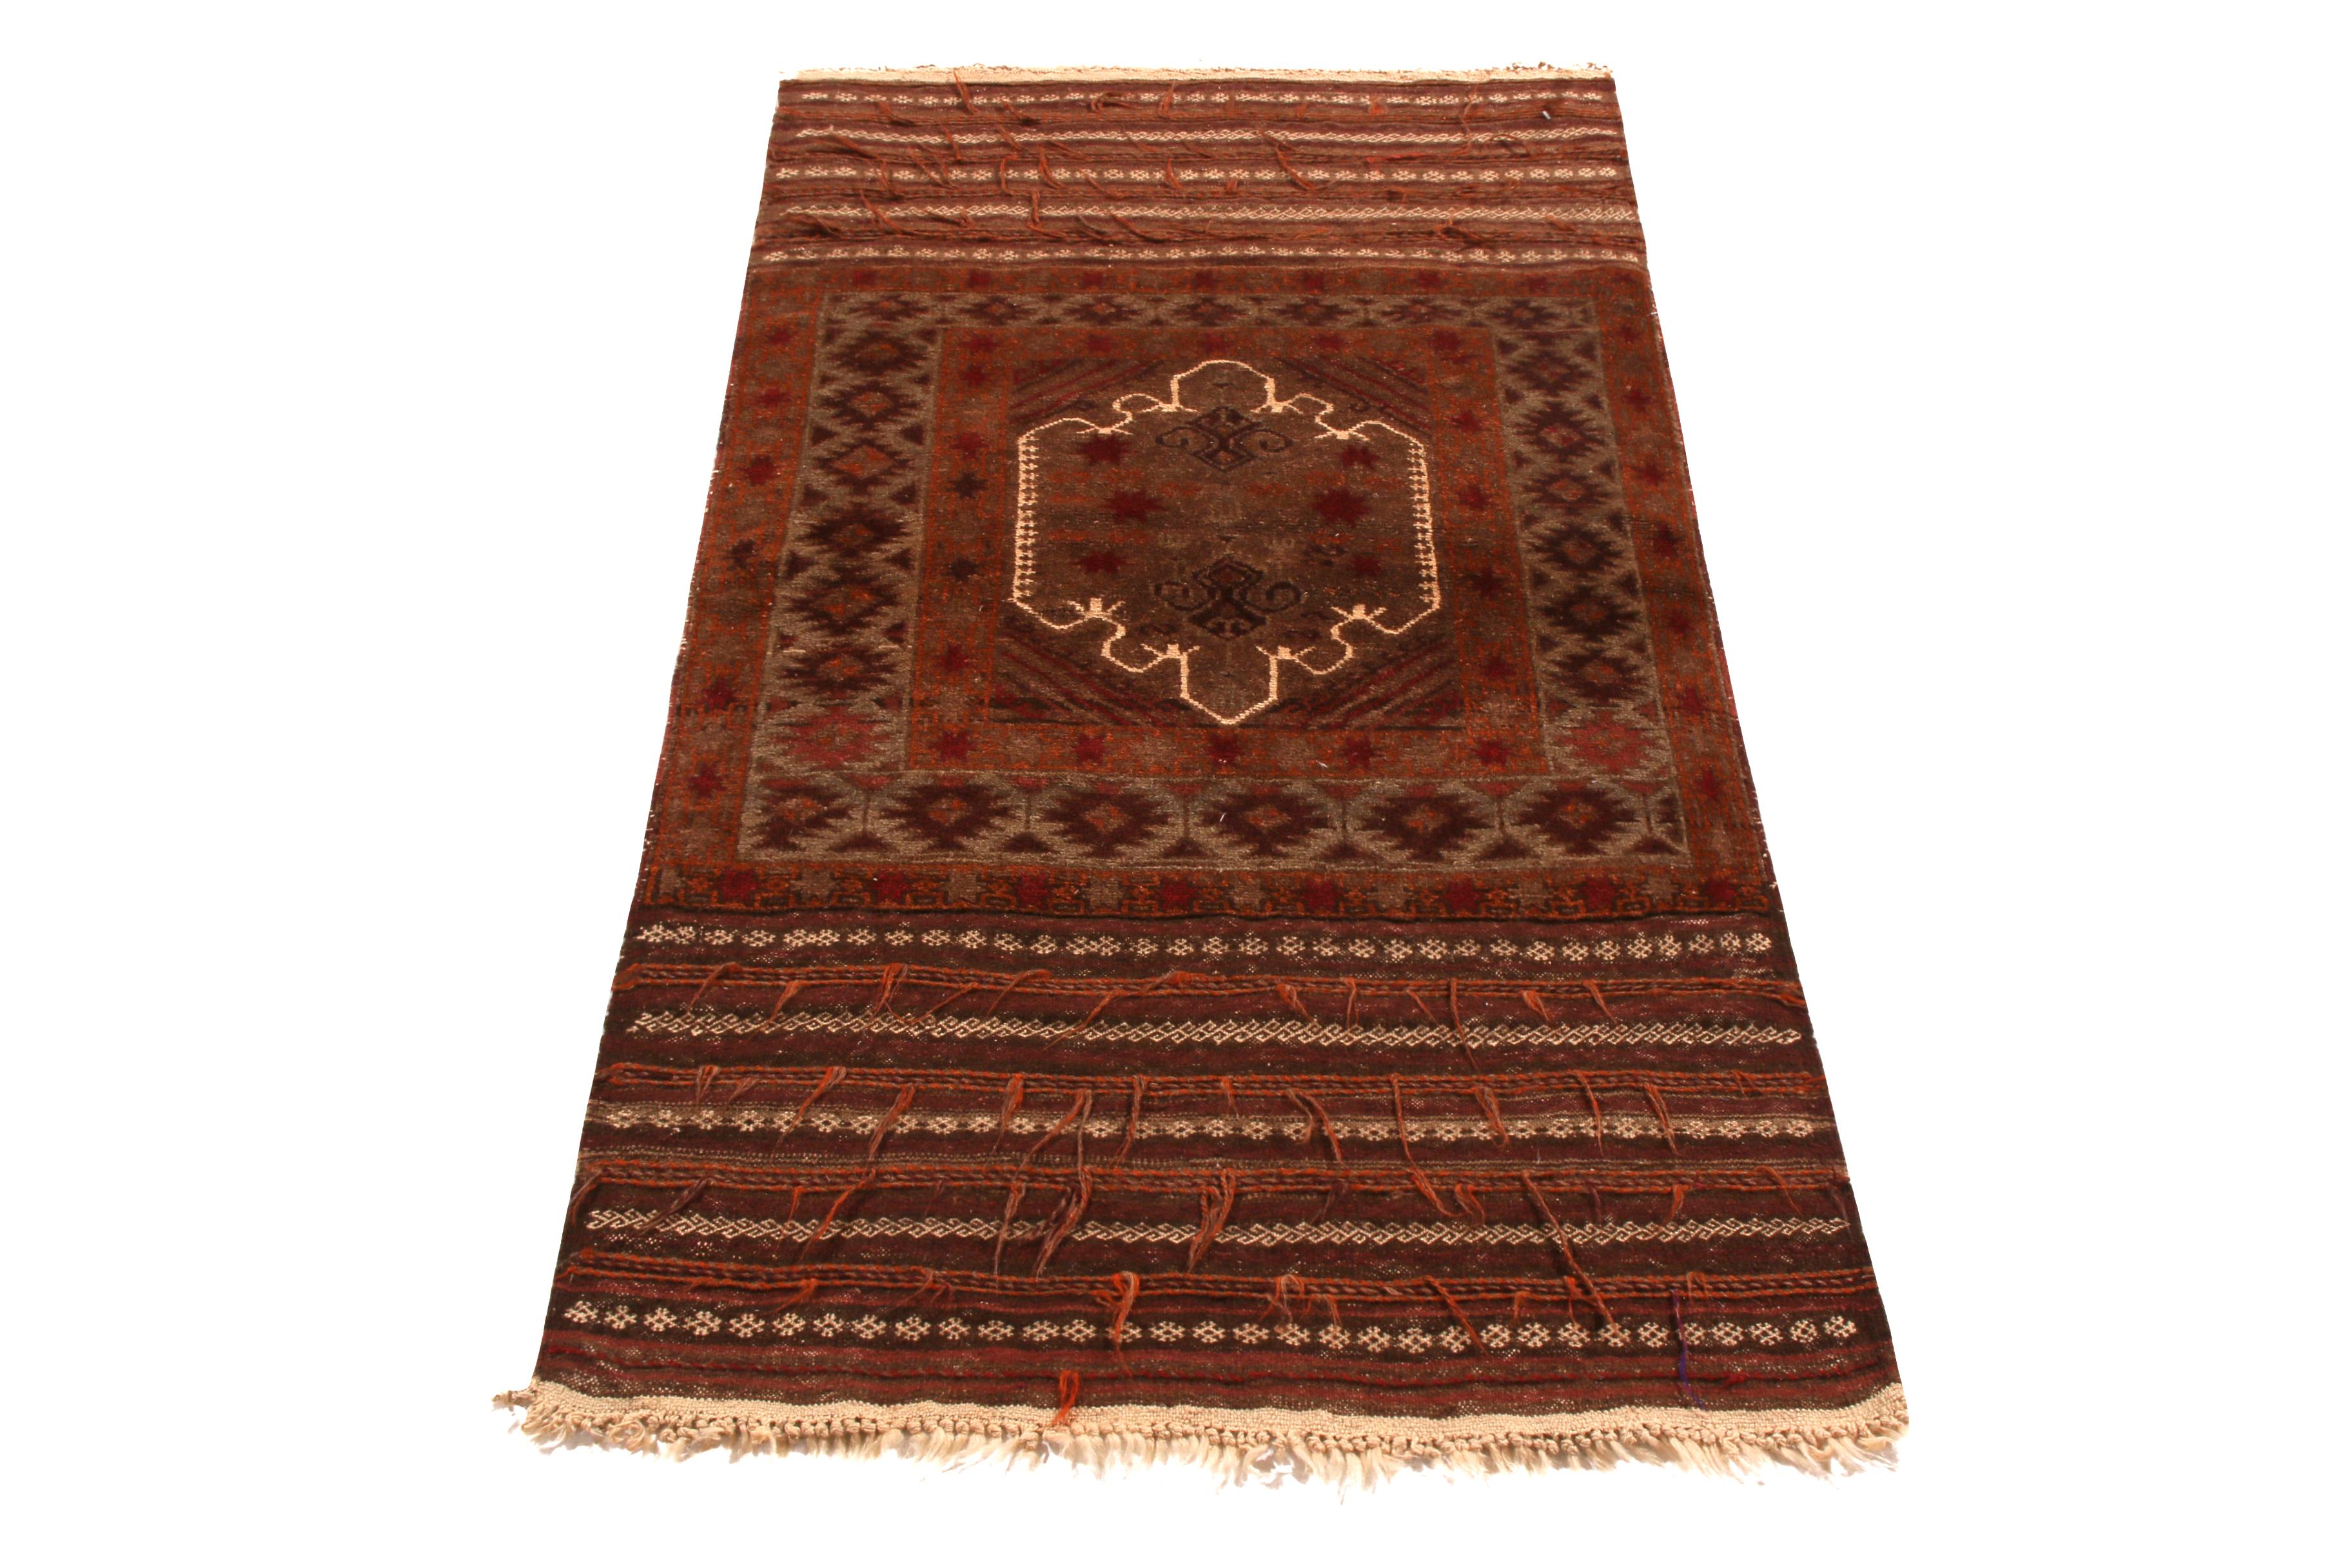 Made with hand knotted wool pile originating between 1950-1960, this vintage midcentury Baluch Persian rug employs the subtle juxtaposition of gentle and defined color and pattern in a skillful fashion only the most celebrated finds of the period